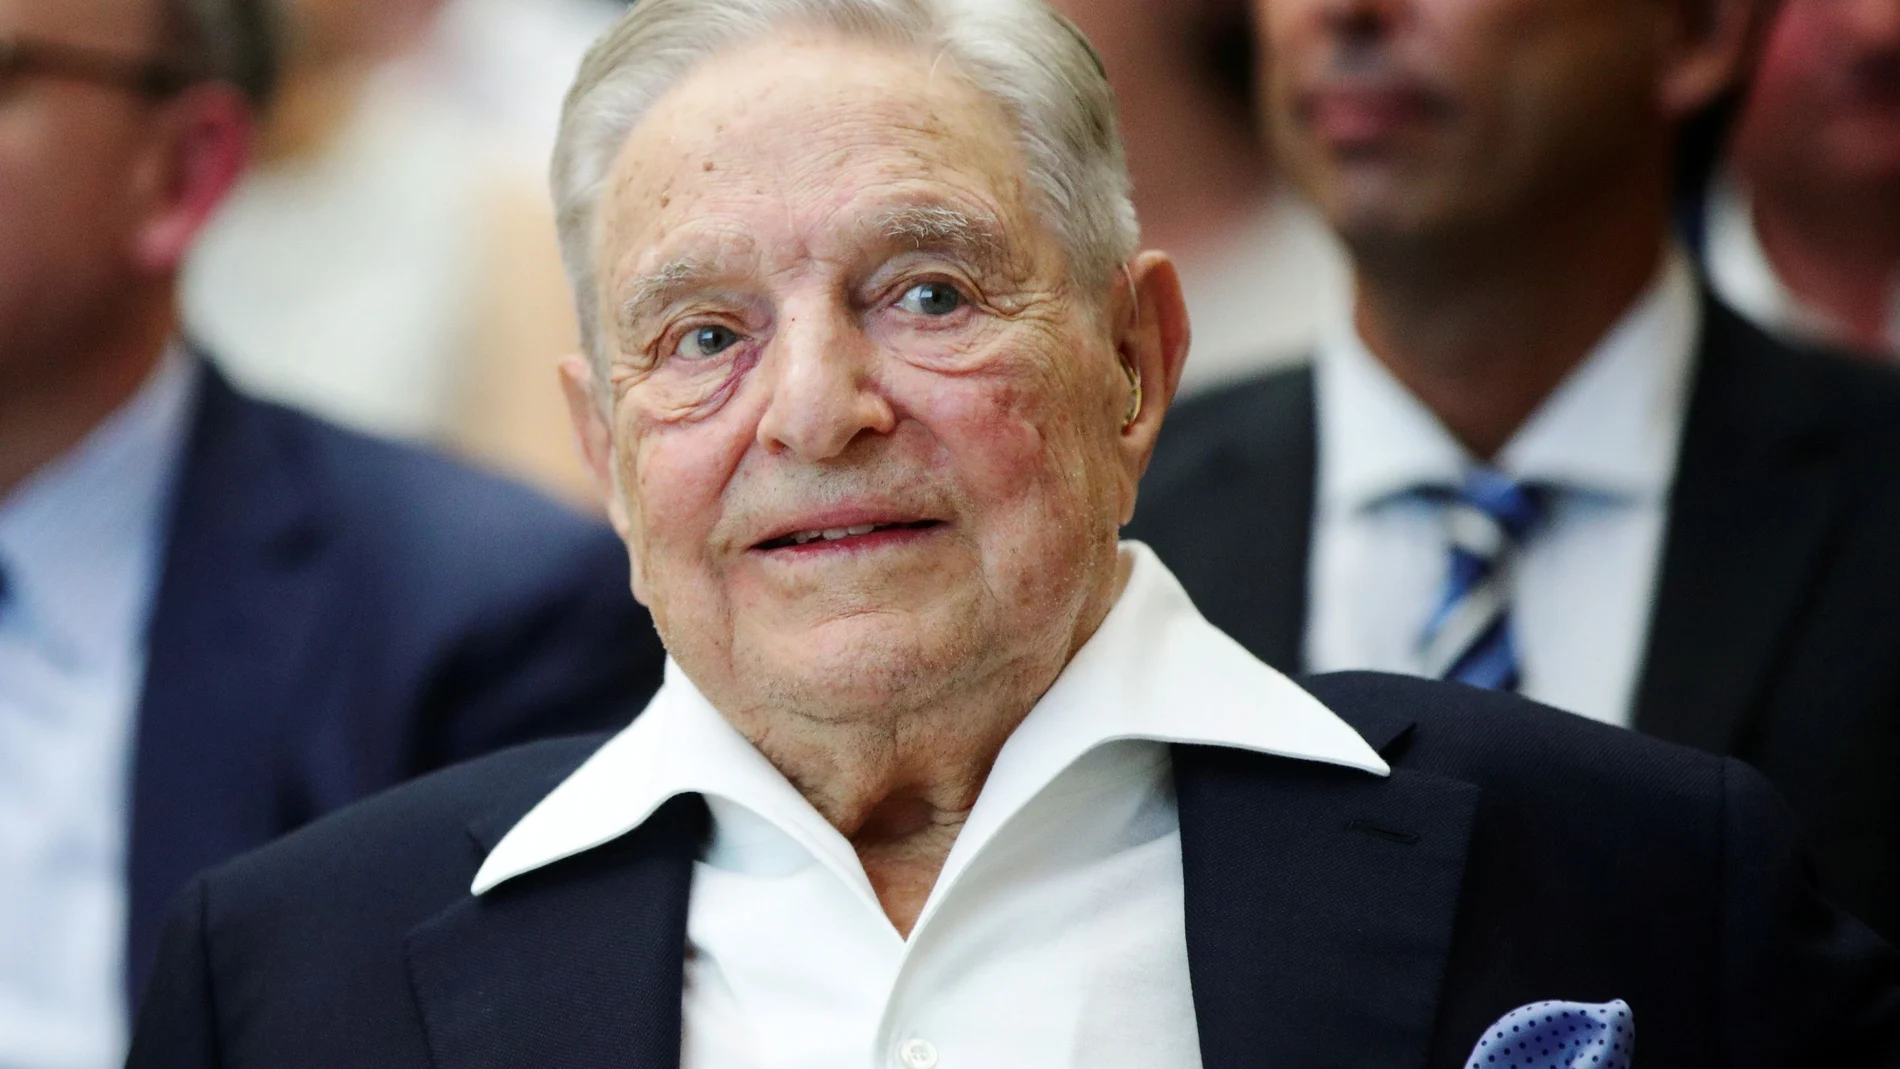 FILE PHOTO: Billionaire investor George Soros is awarded the Schumpeter Prize, an Austrian award for achievement in economics and politics, in Vienna, where the Central European University he funds is opening a new campus after being forced out of his nat